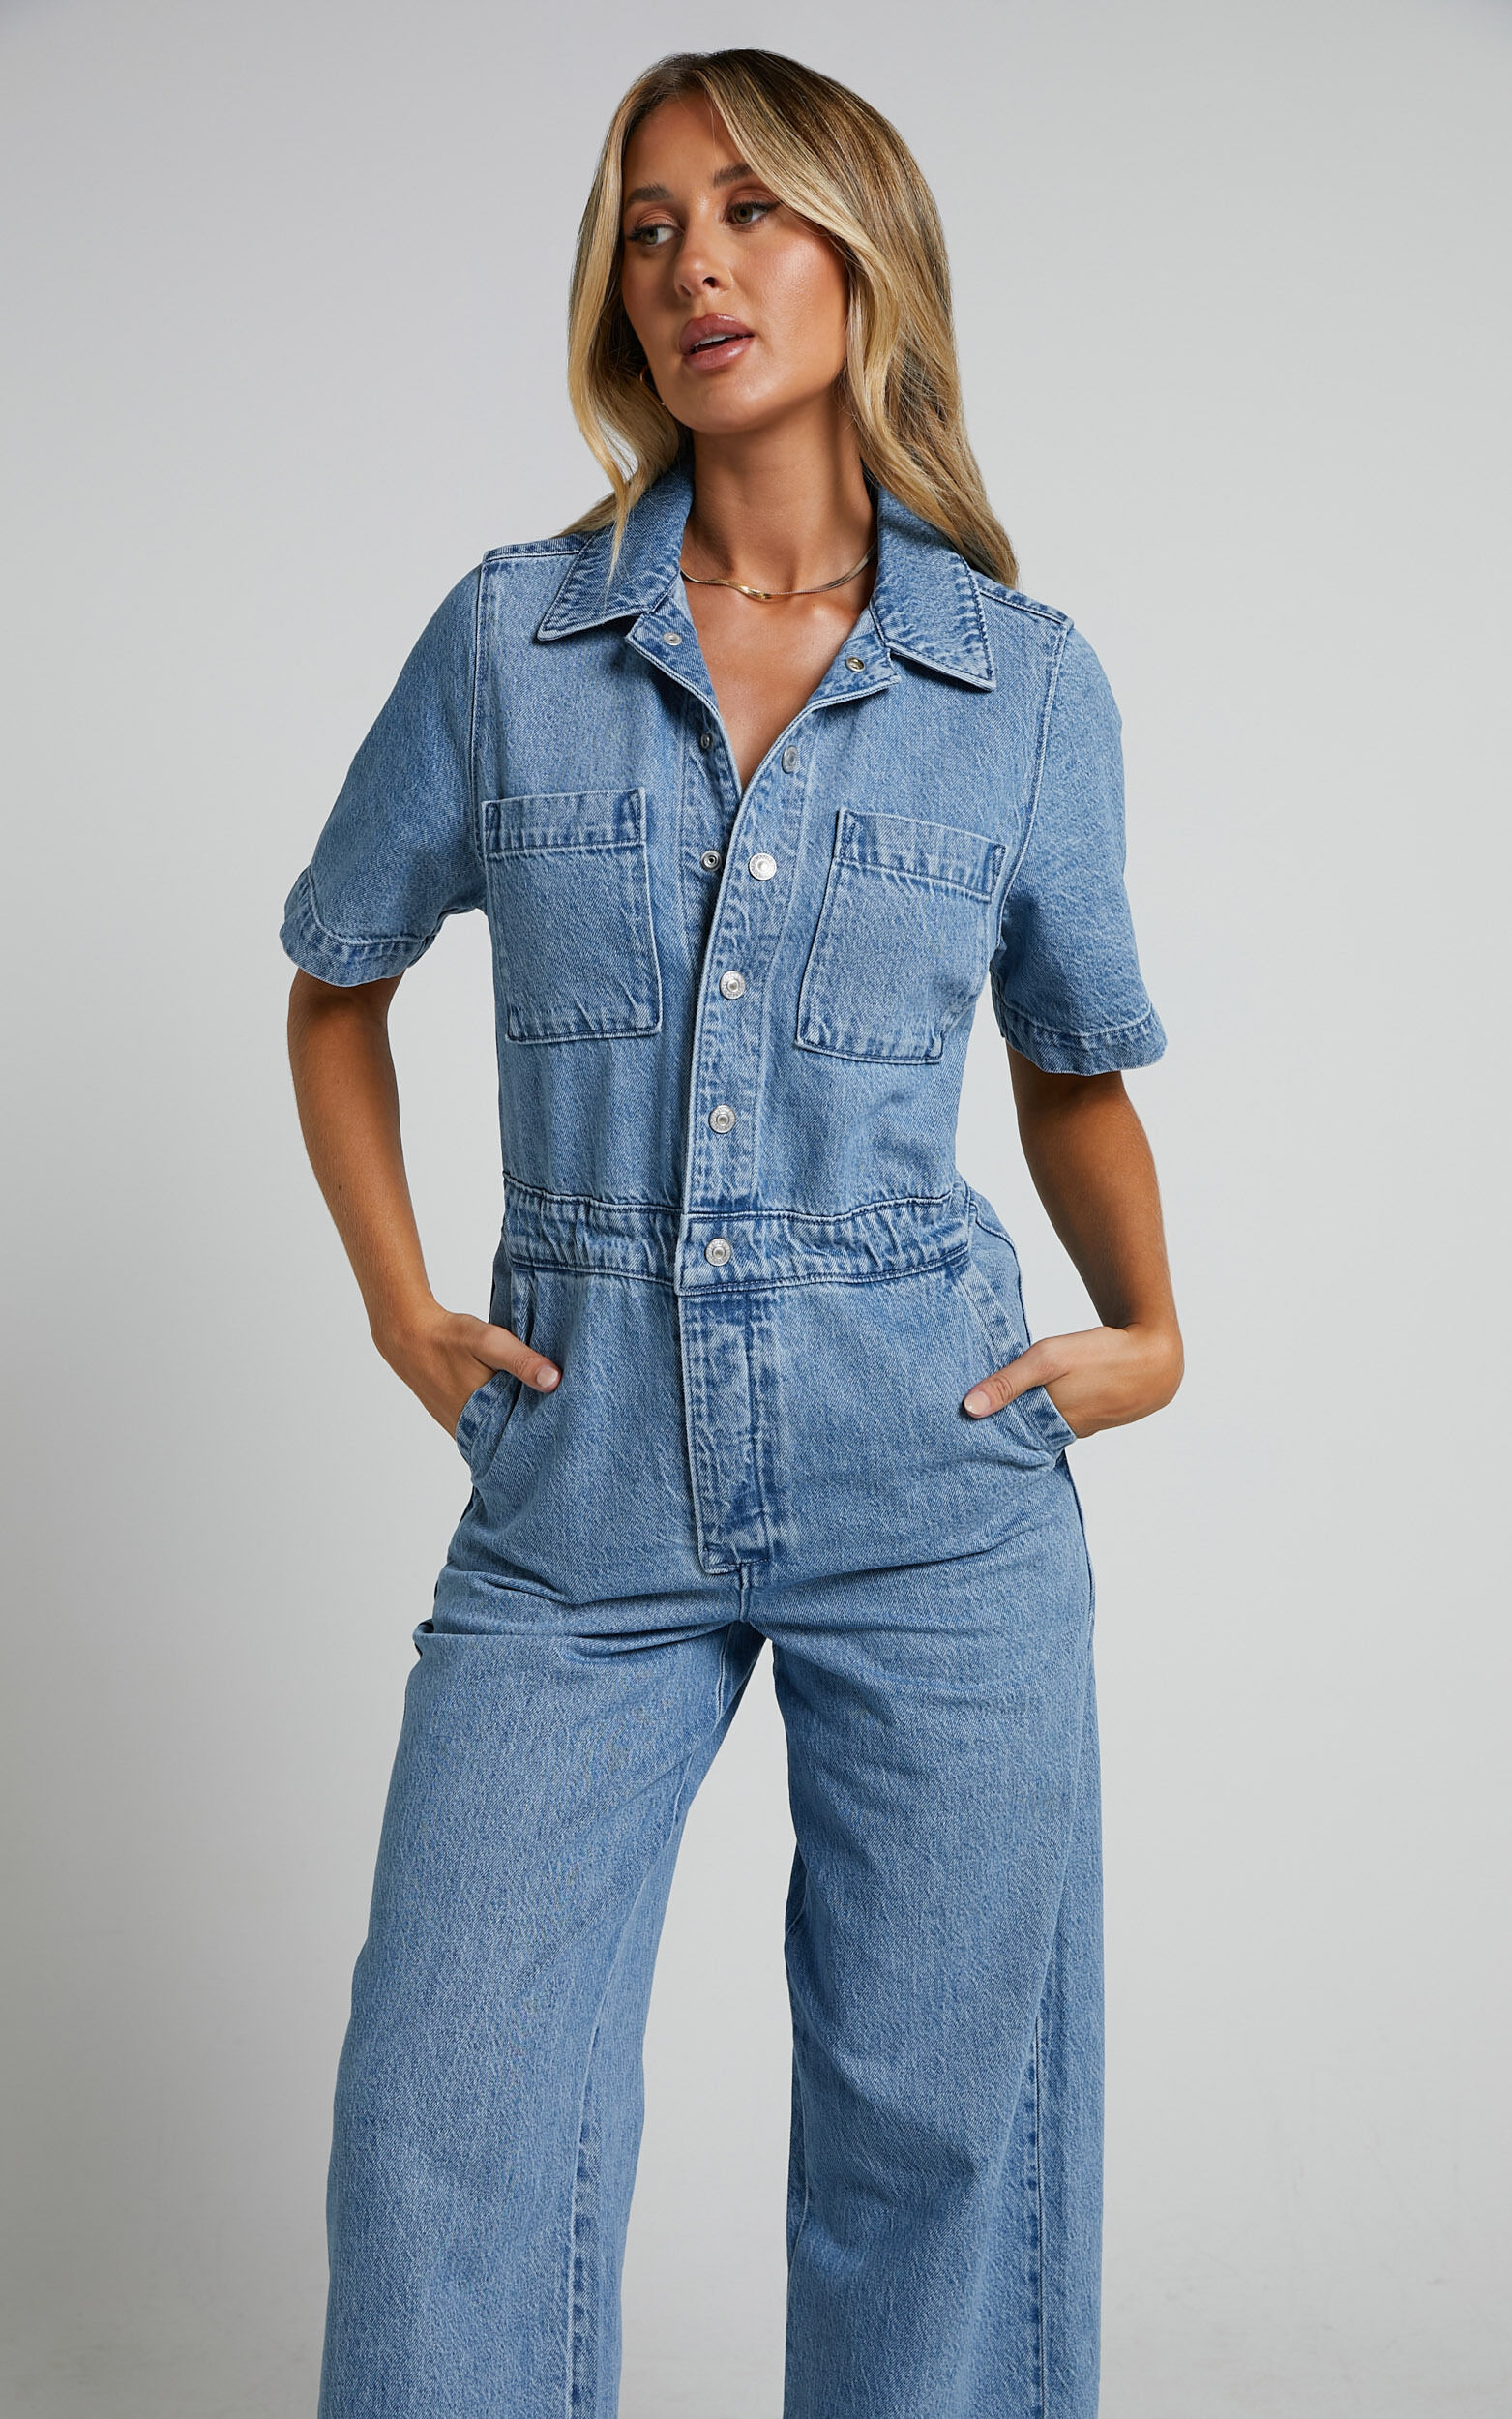 Levi's - SS BOILERSUIT in More Money More Problems | Showpo USA